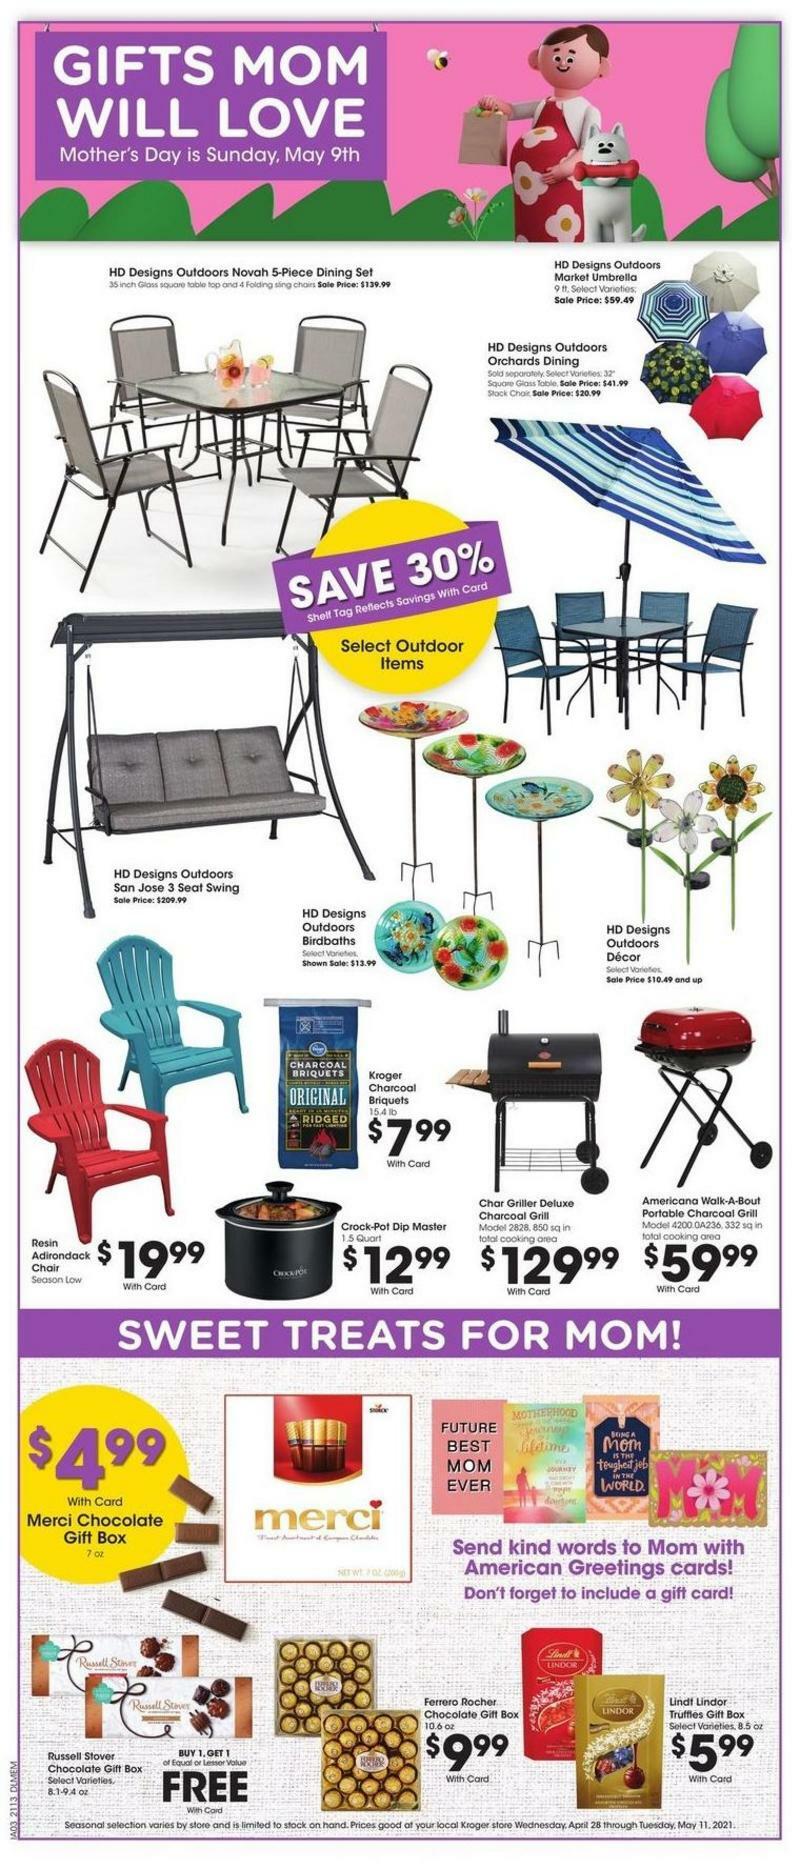 Kroger Weekly Ad from April 28